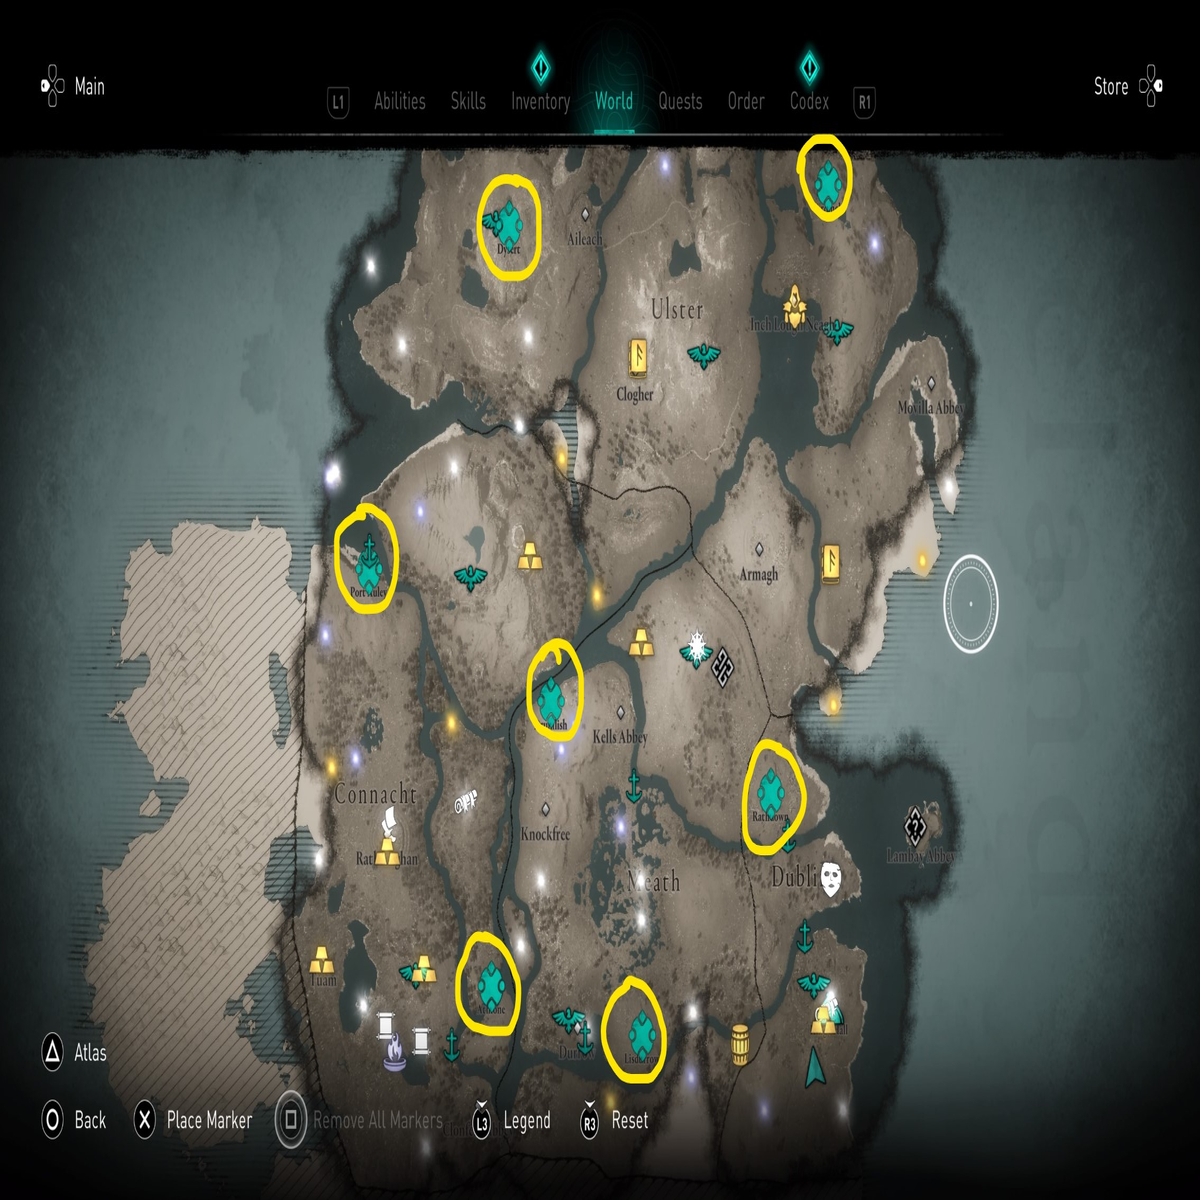 GPO map - All of the key locations marked